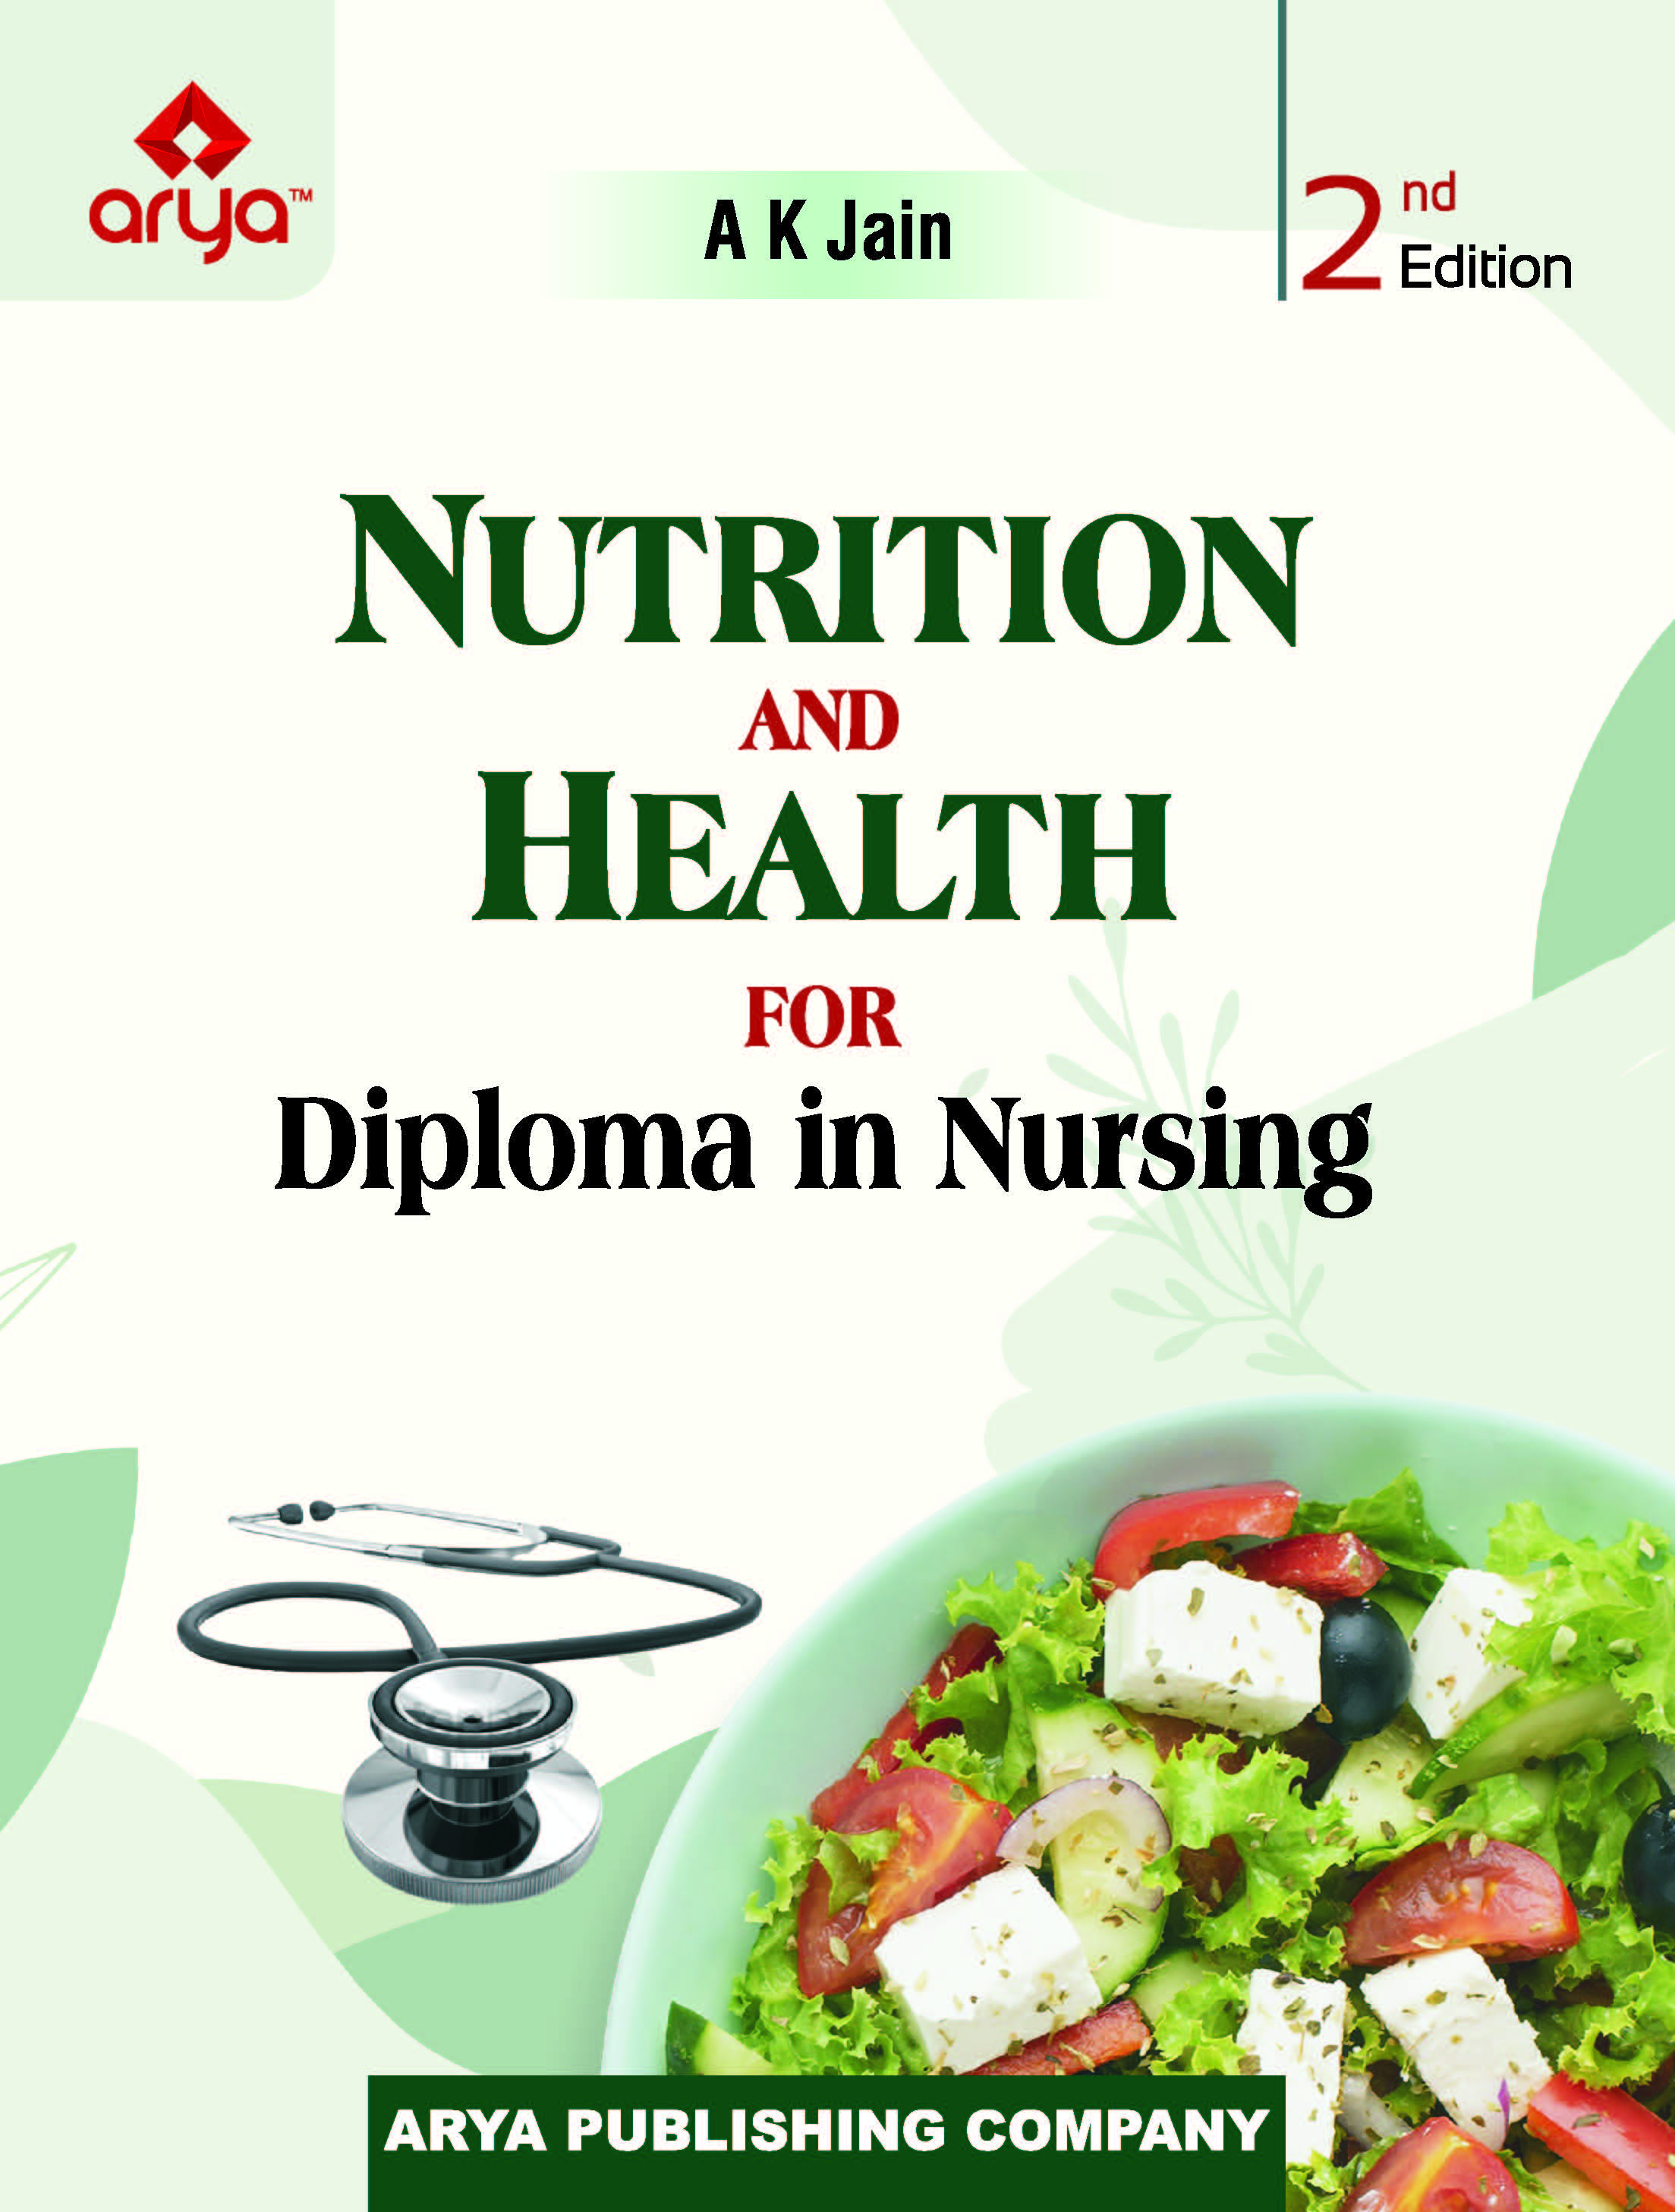 Nutrition and Health for Diploma in Nursing